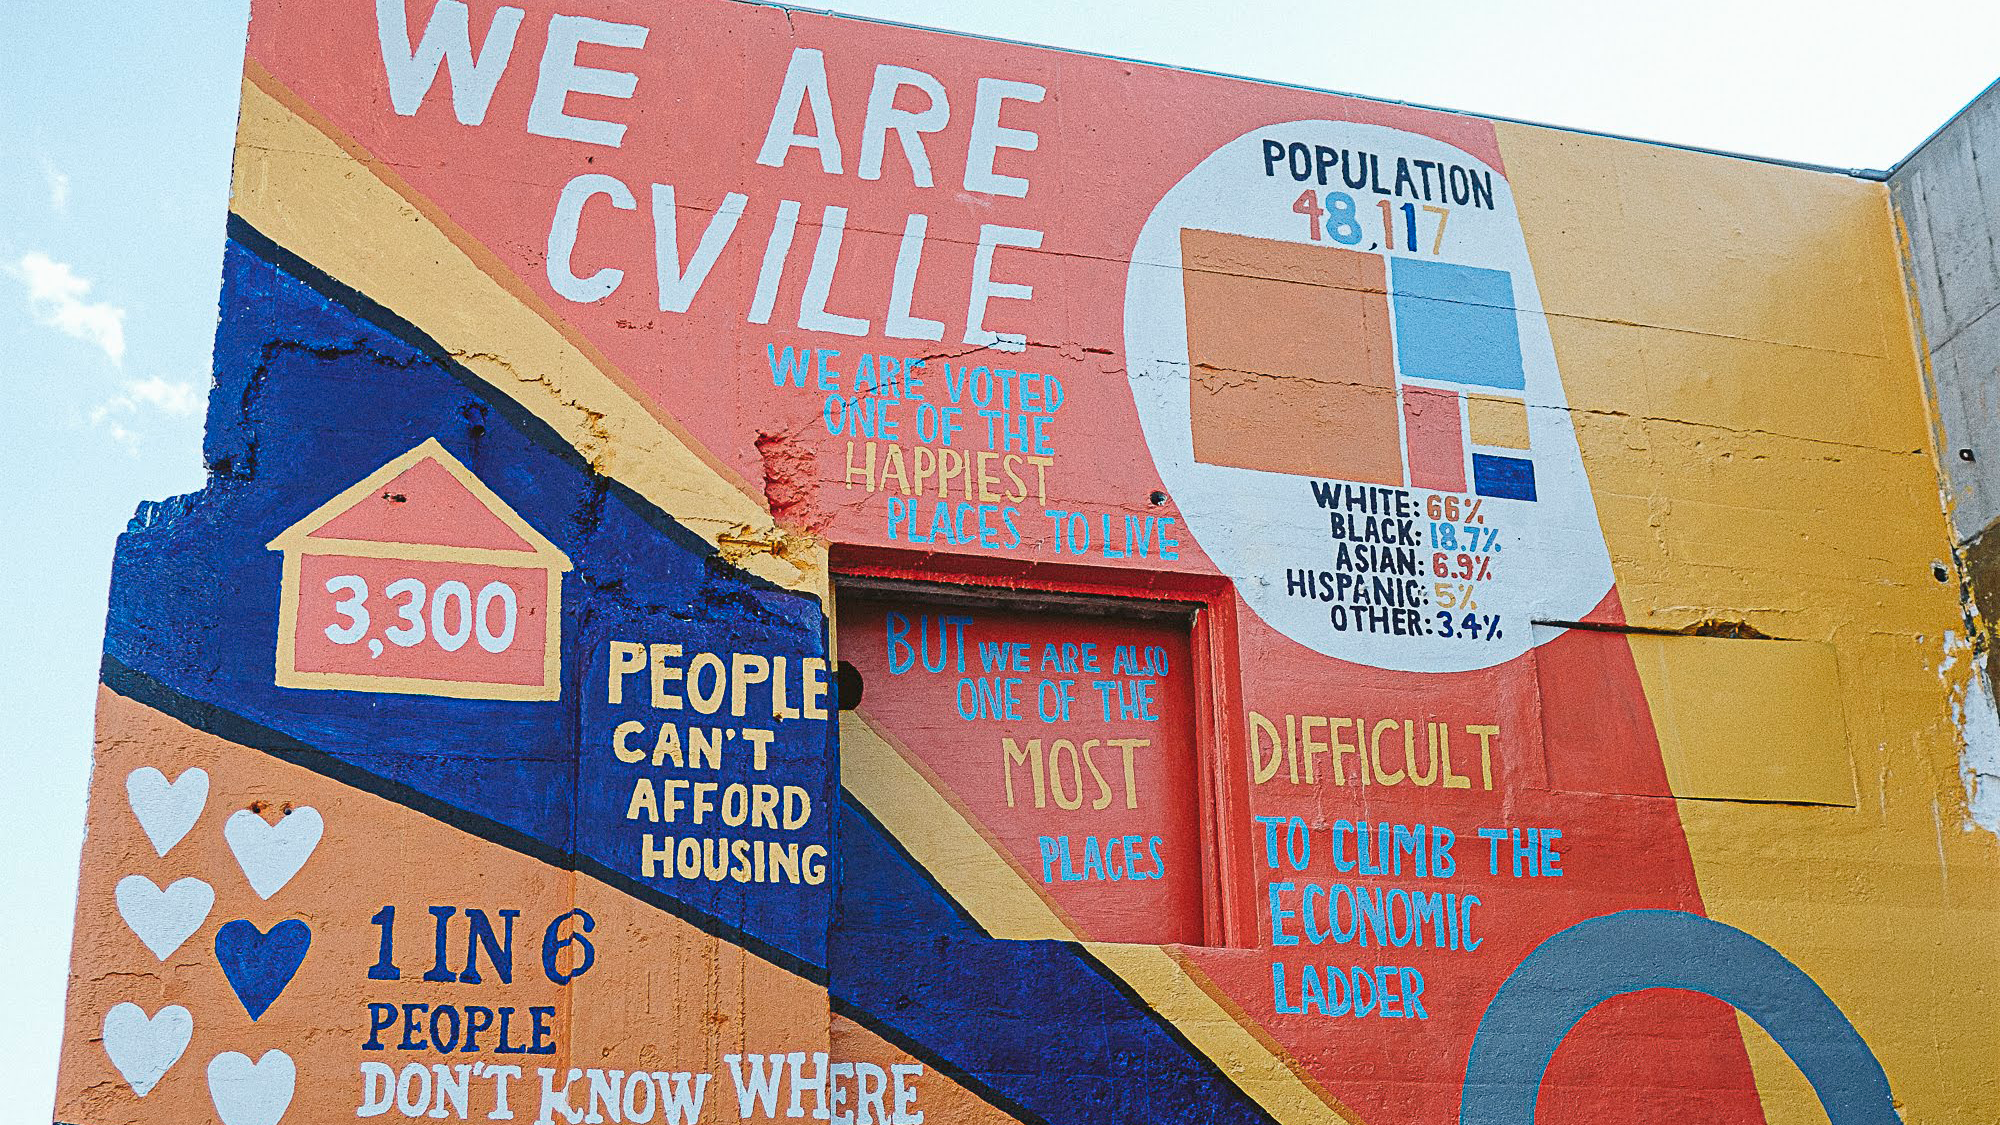 We are cville mural